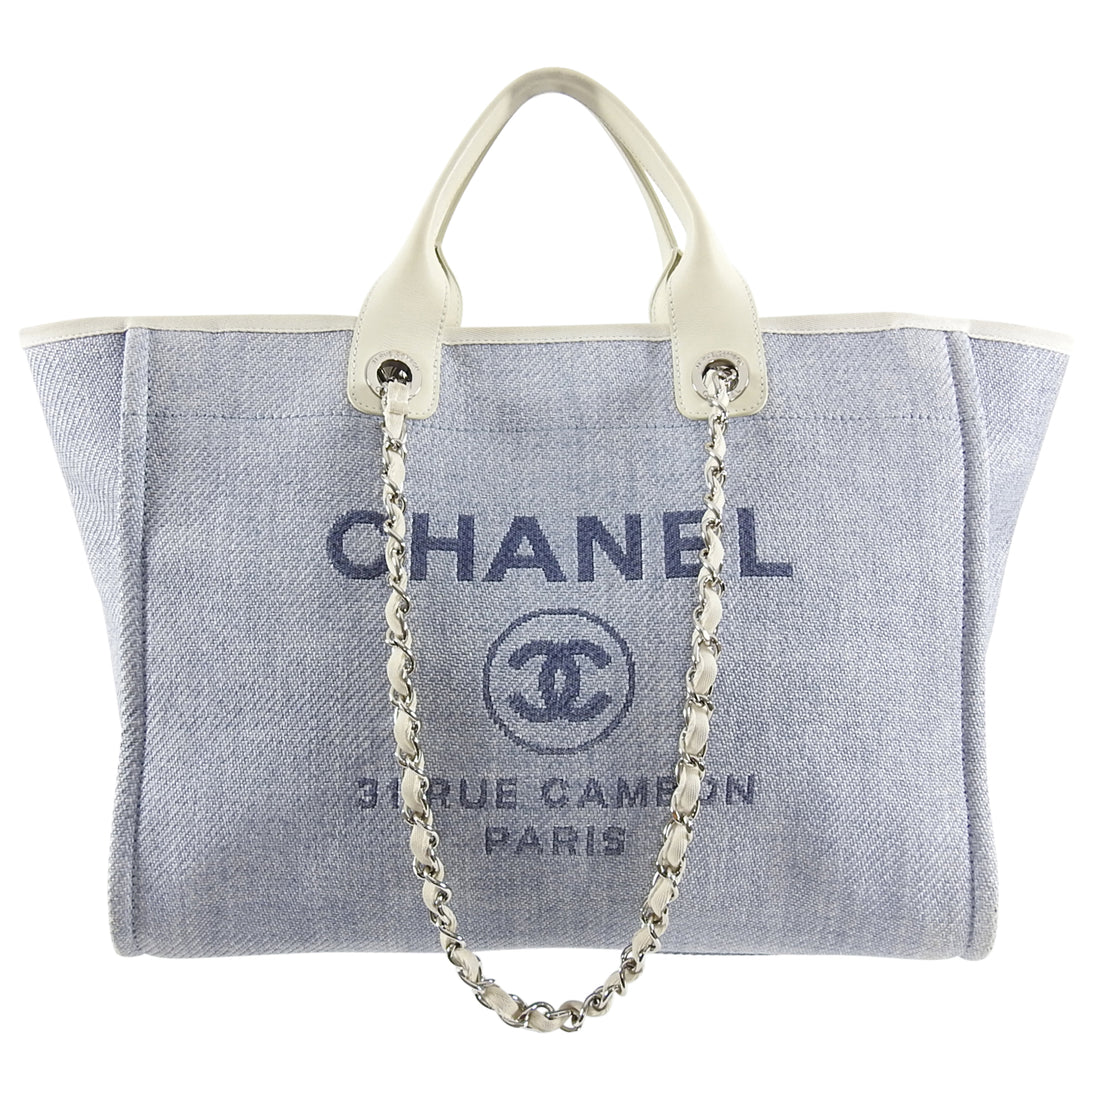 Chanel Large Embossed Deauville Shopping Tote